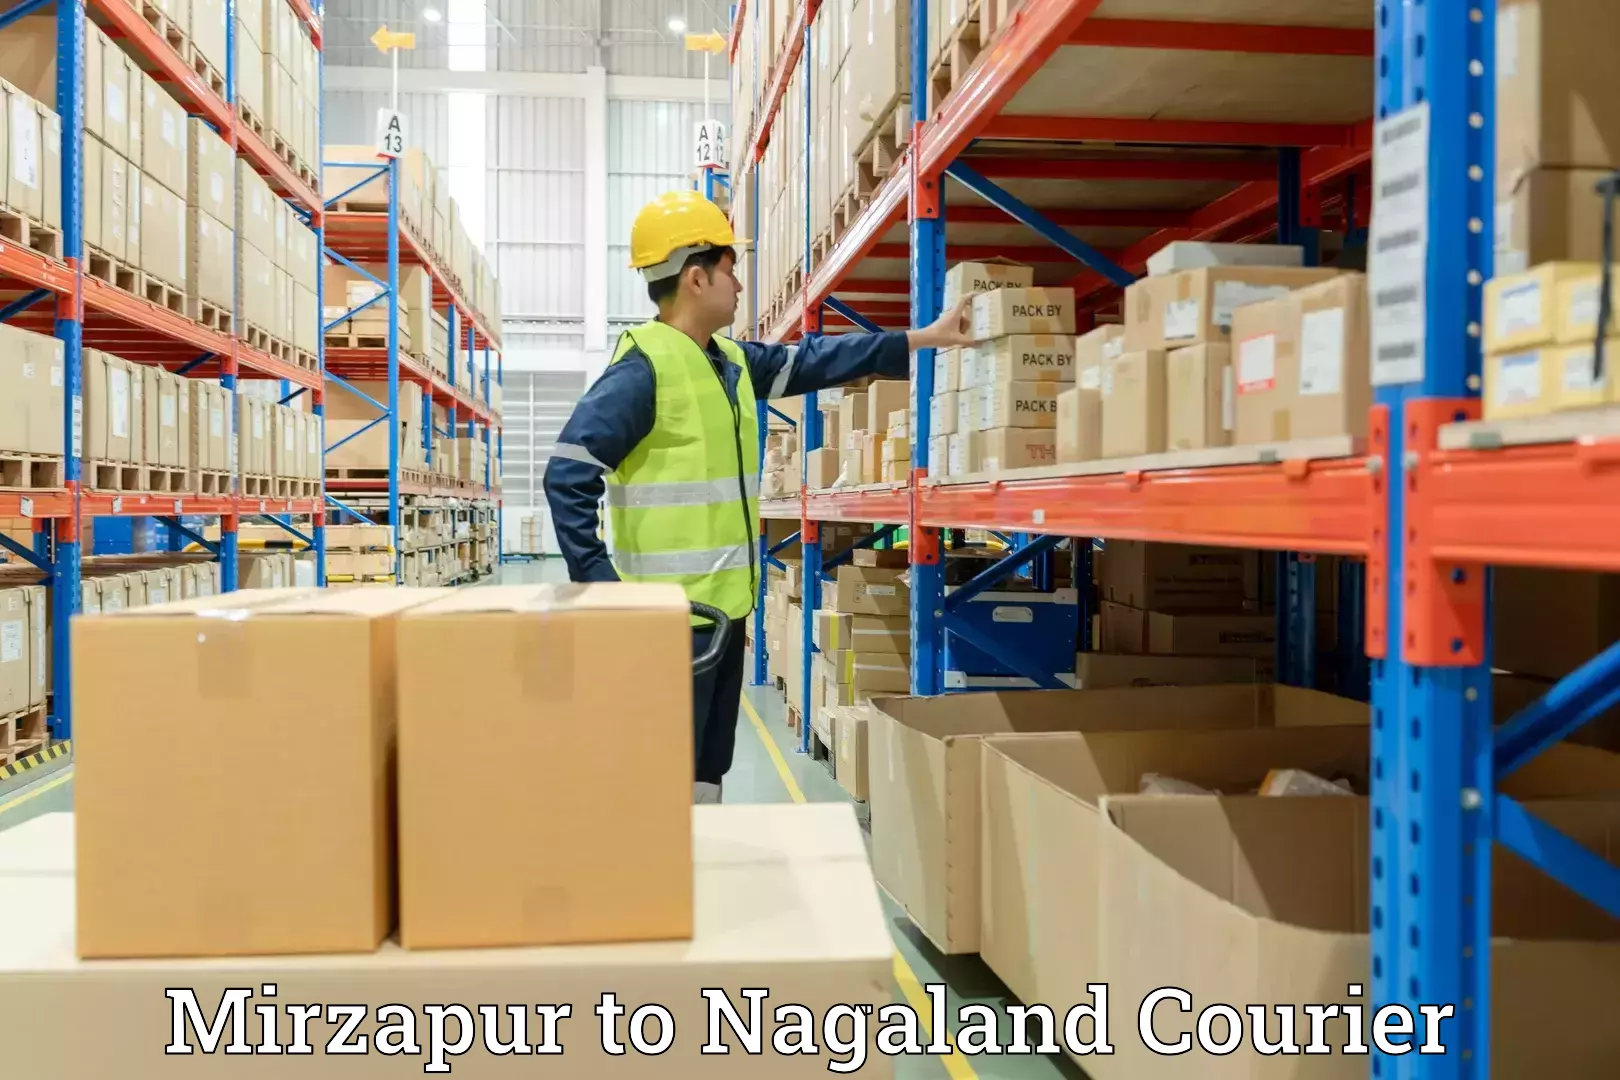 Reliable moving assistance in Mirzapur to Nagaland